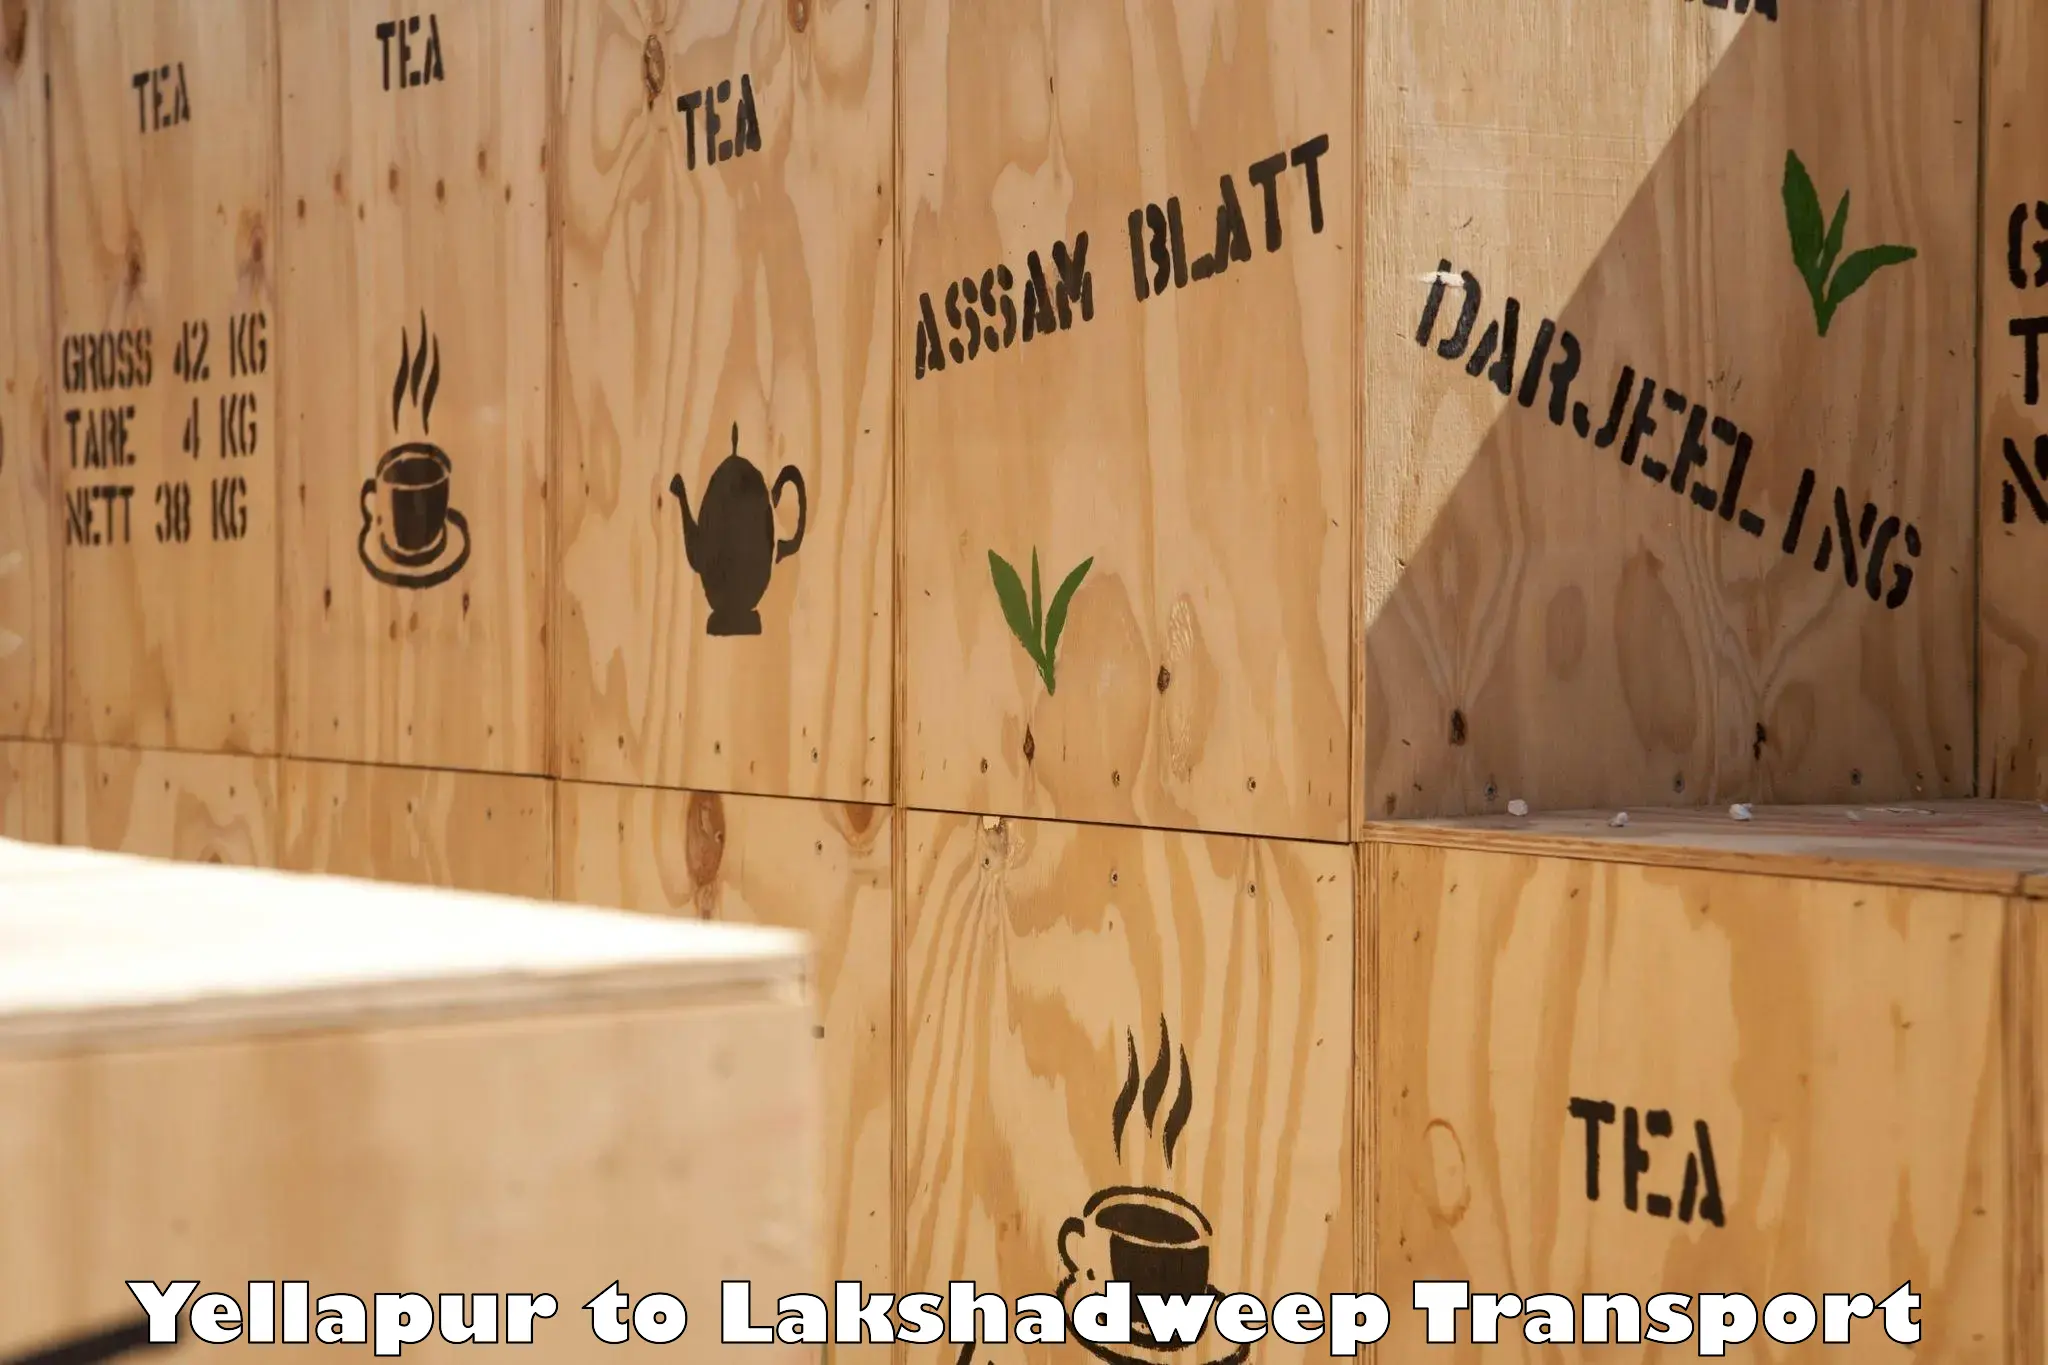 Commercial transport service Yellapur to Lakshadweep